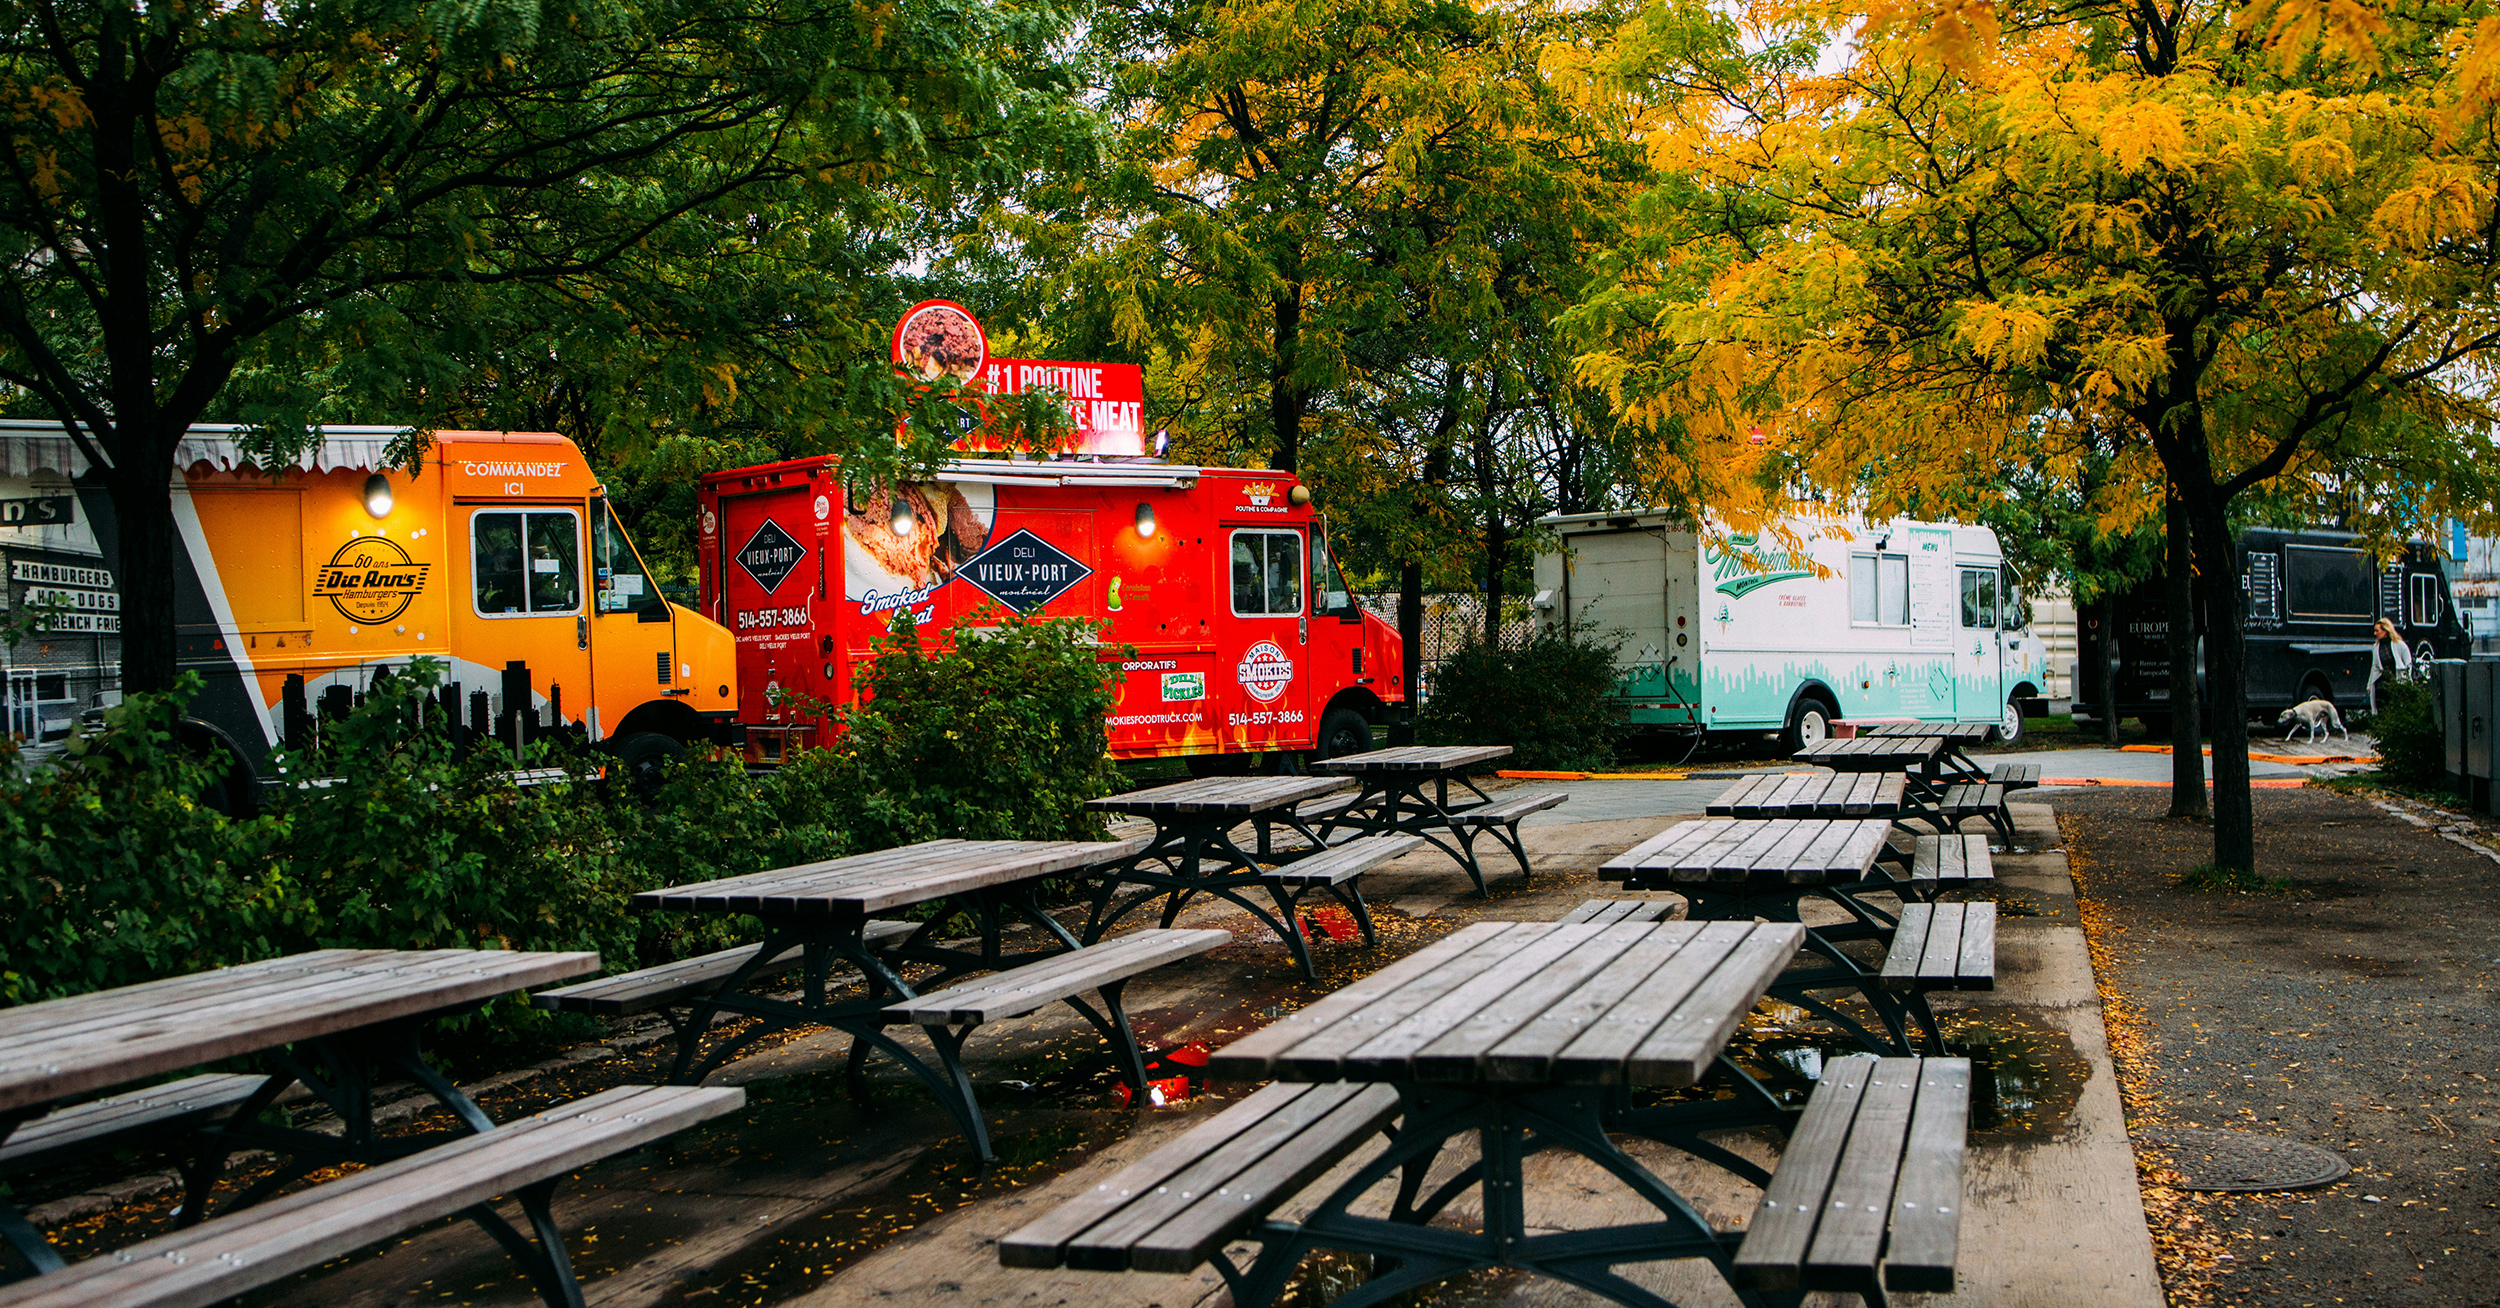 How to Buy and Run a Food Truck: What You Should Know - food trucks alt1 - Eleven36 Blog